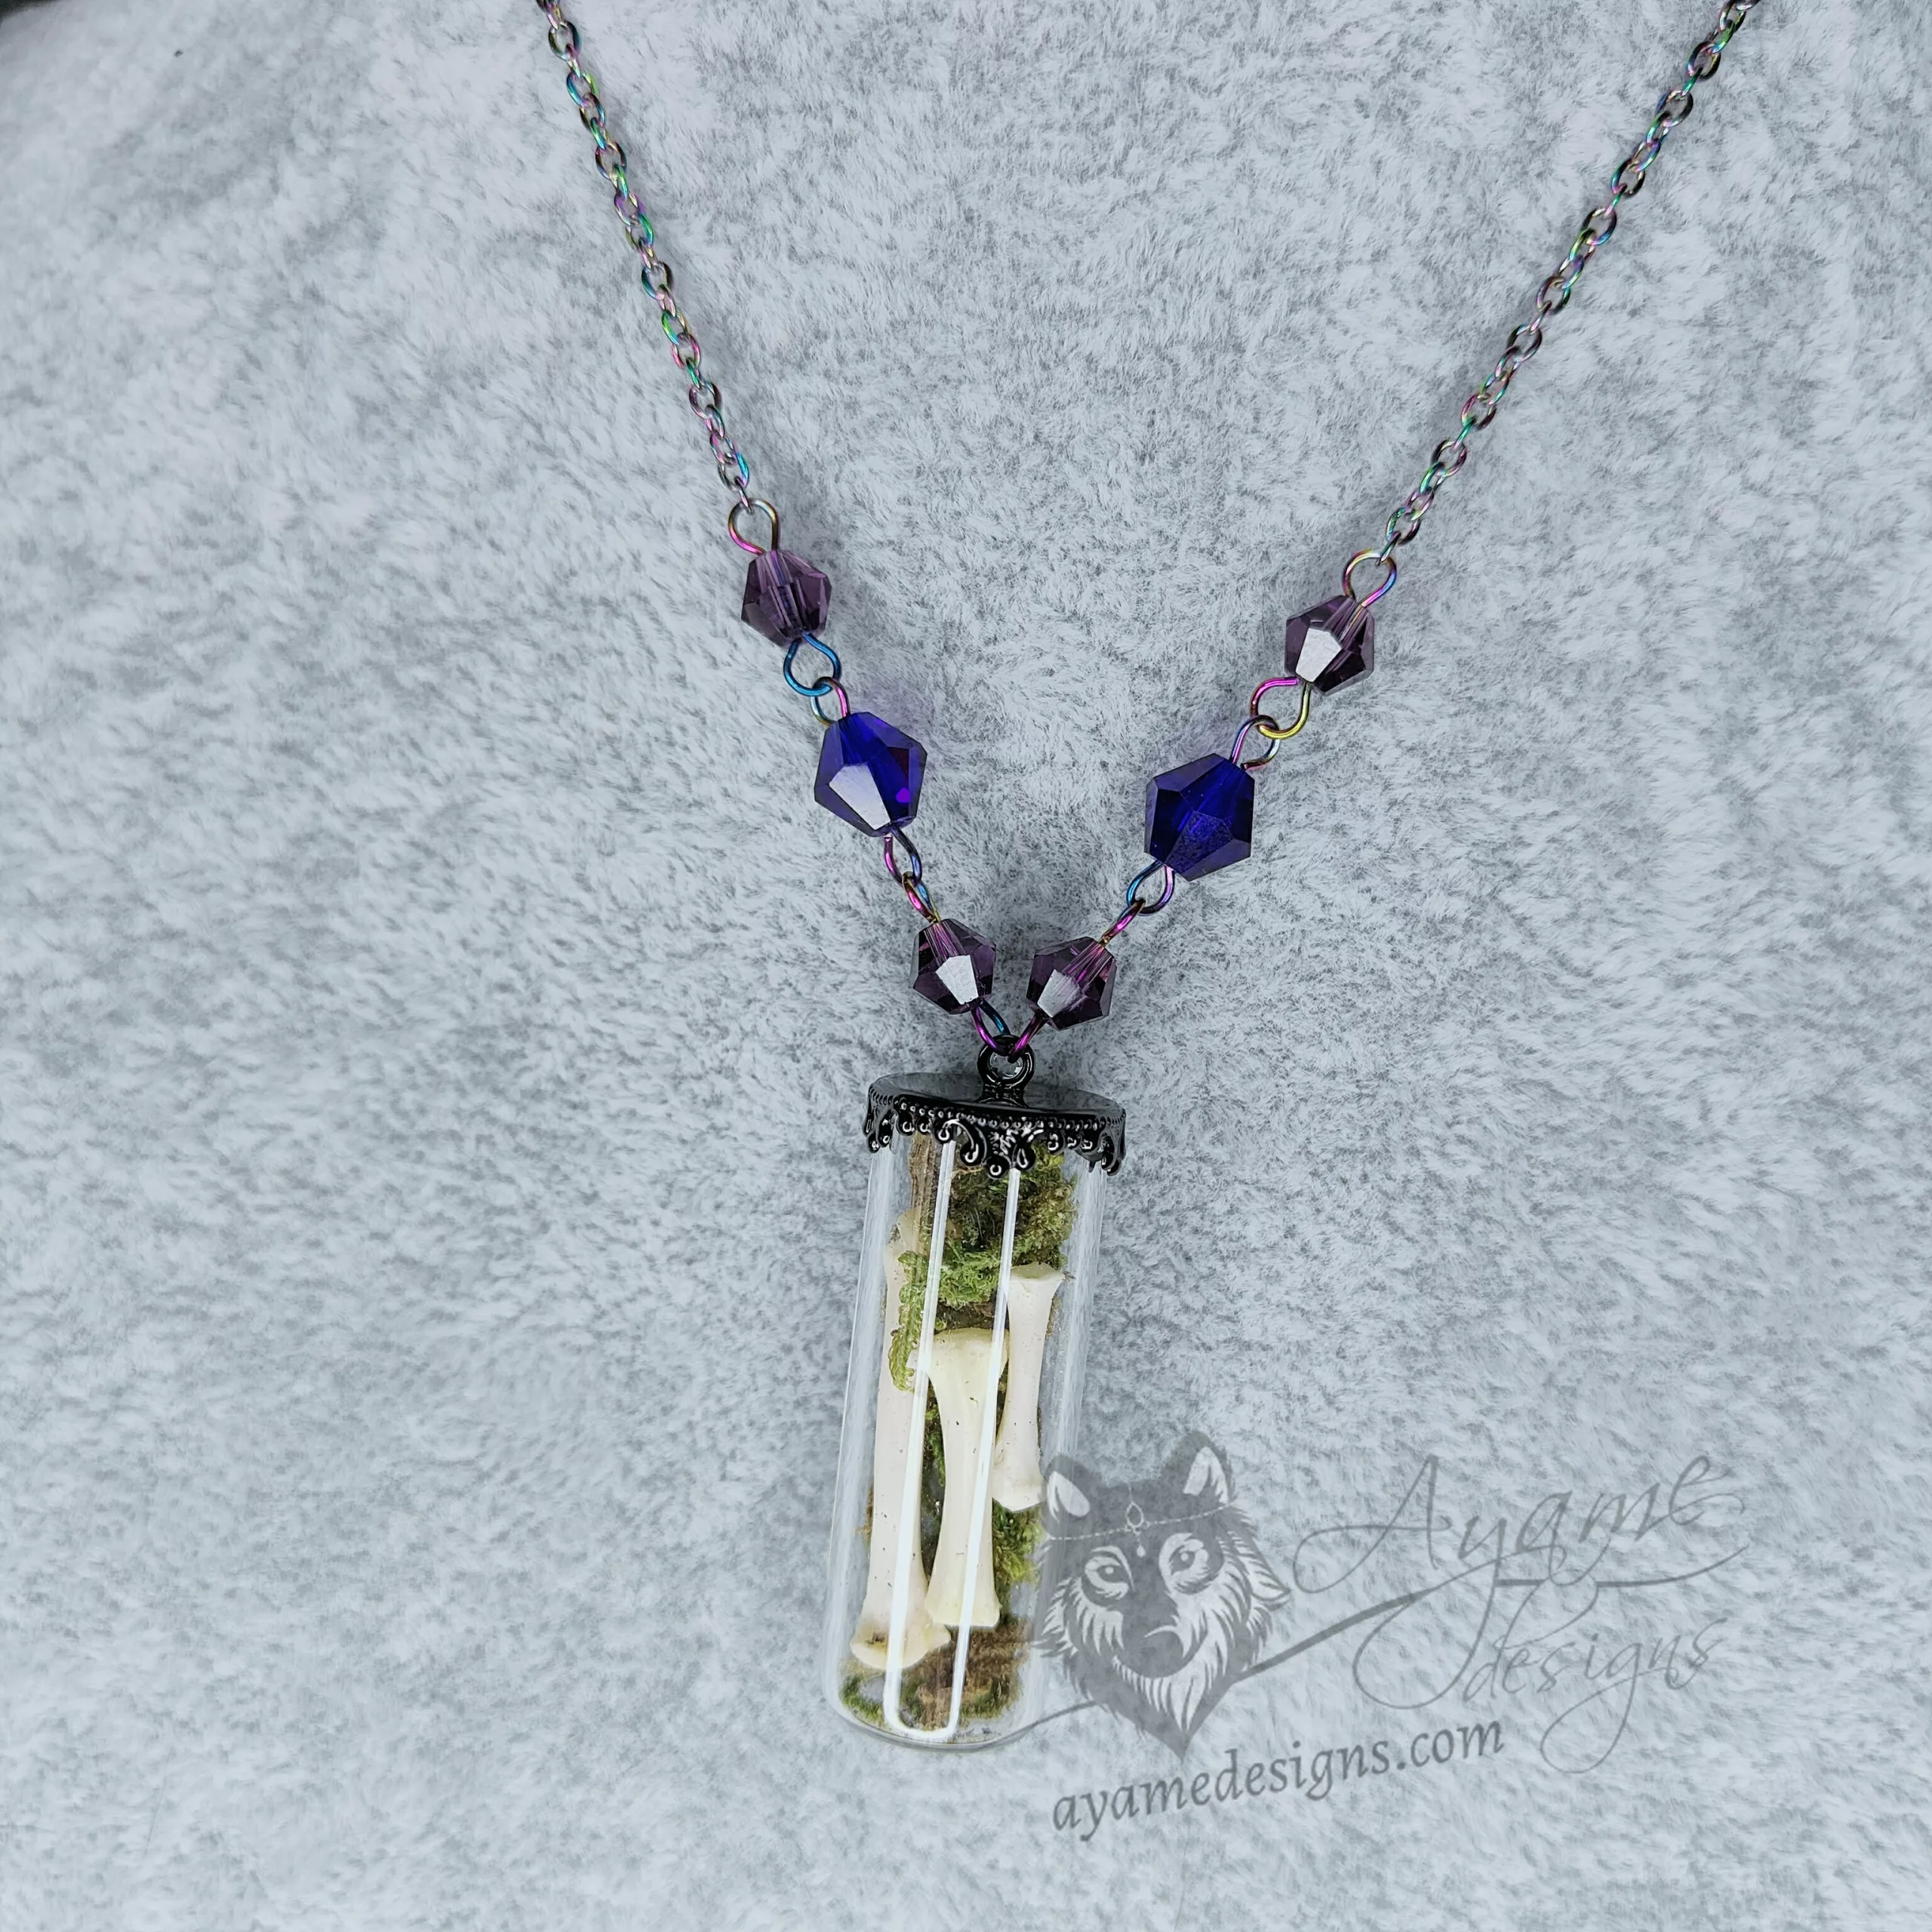 Glass vial necklace with ethically sourced dog bones and moss, purple and blue Austrian crystal beads and rainbow stainless steel chain